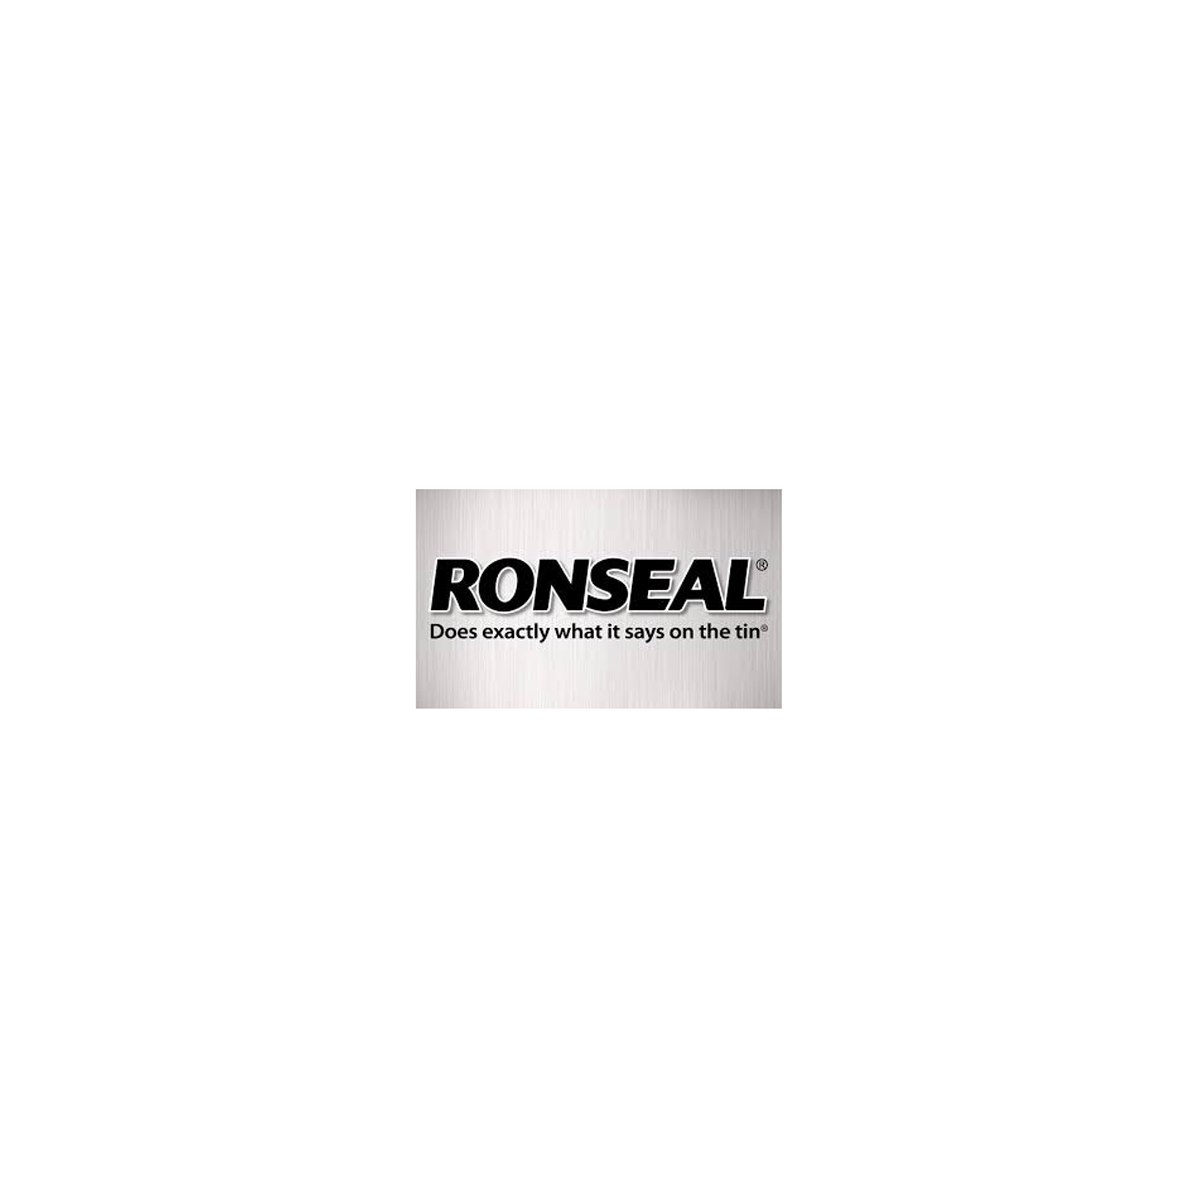 Where to Buy Ronseal Products